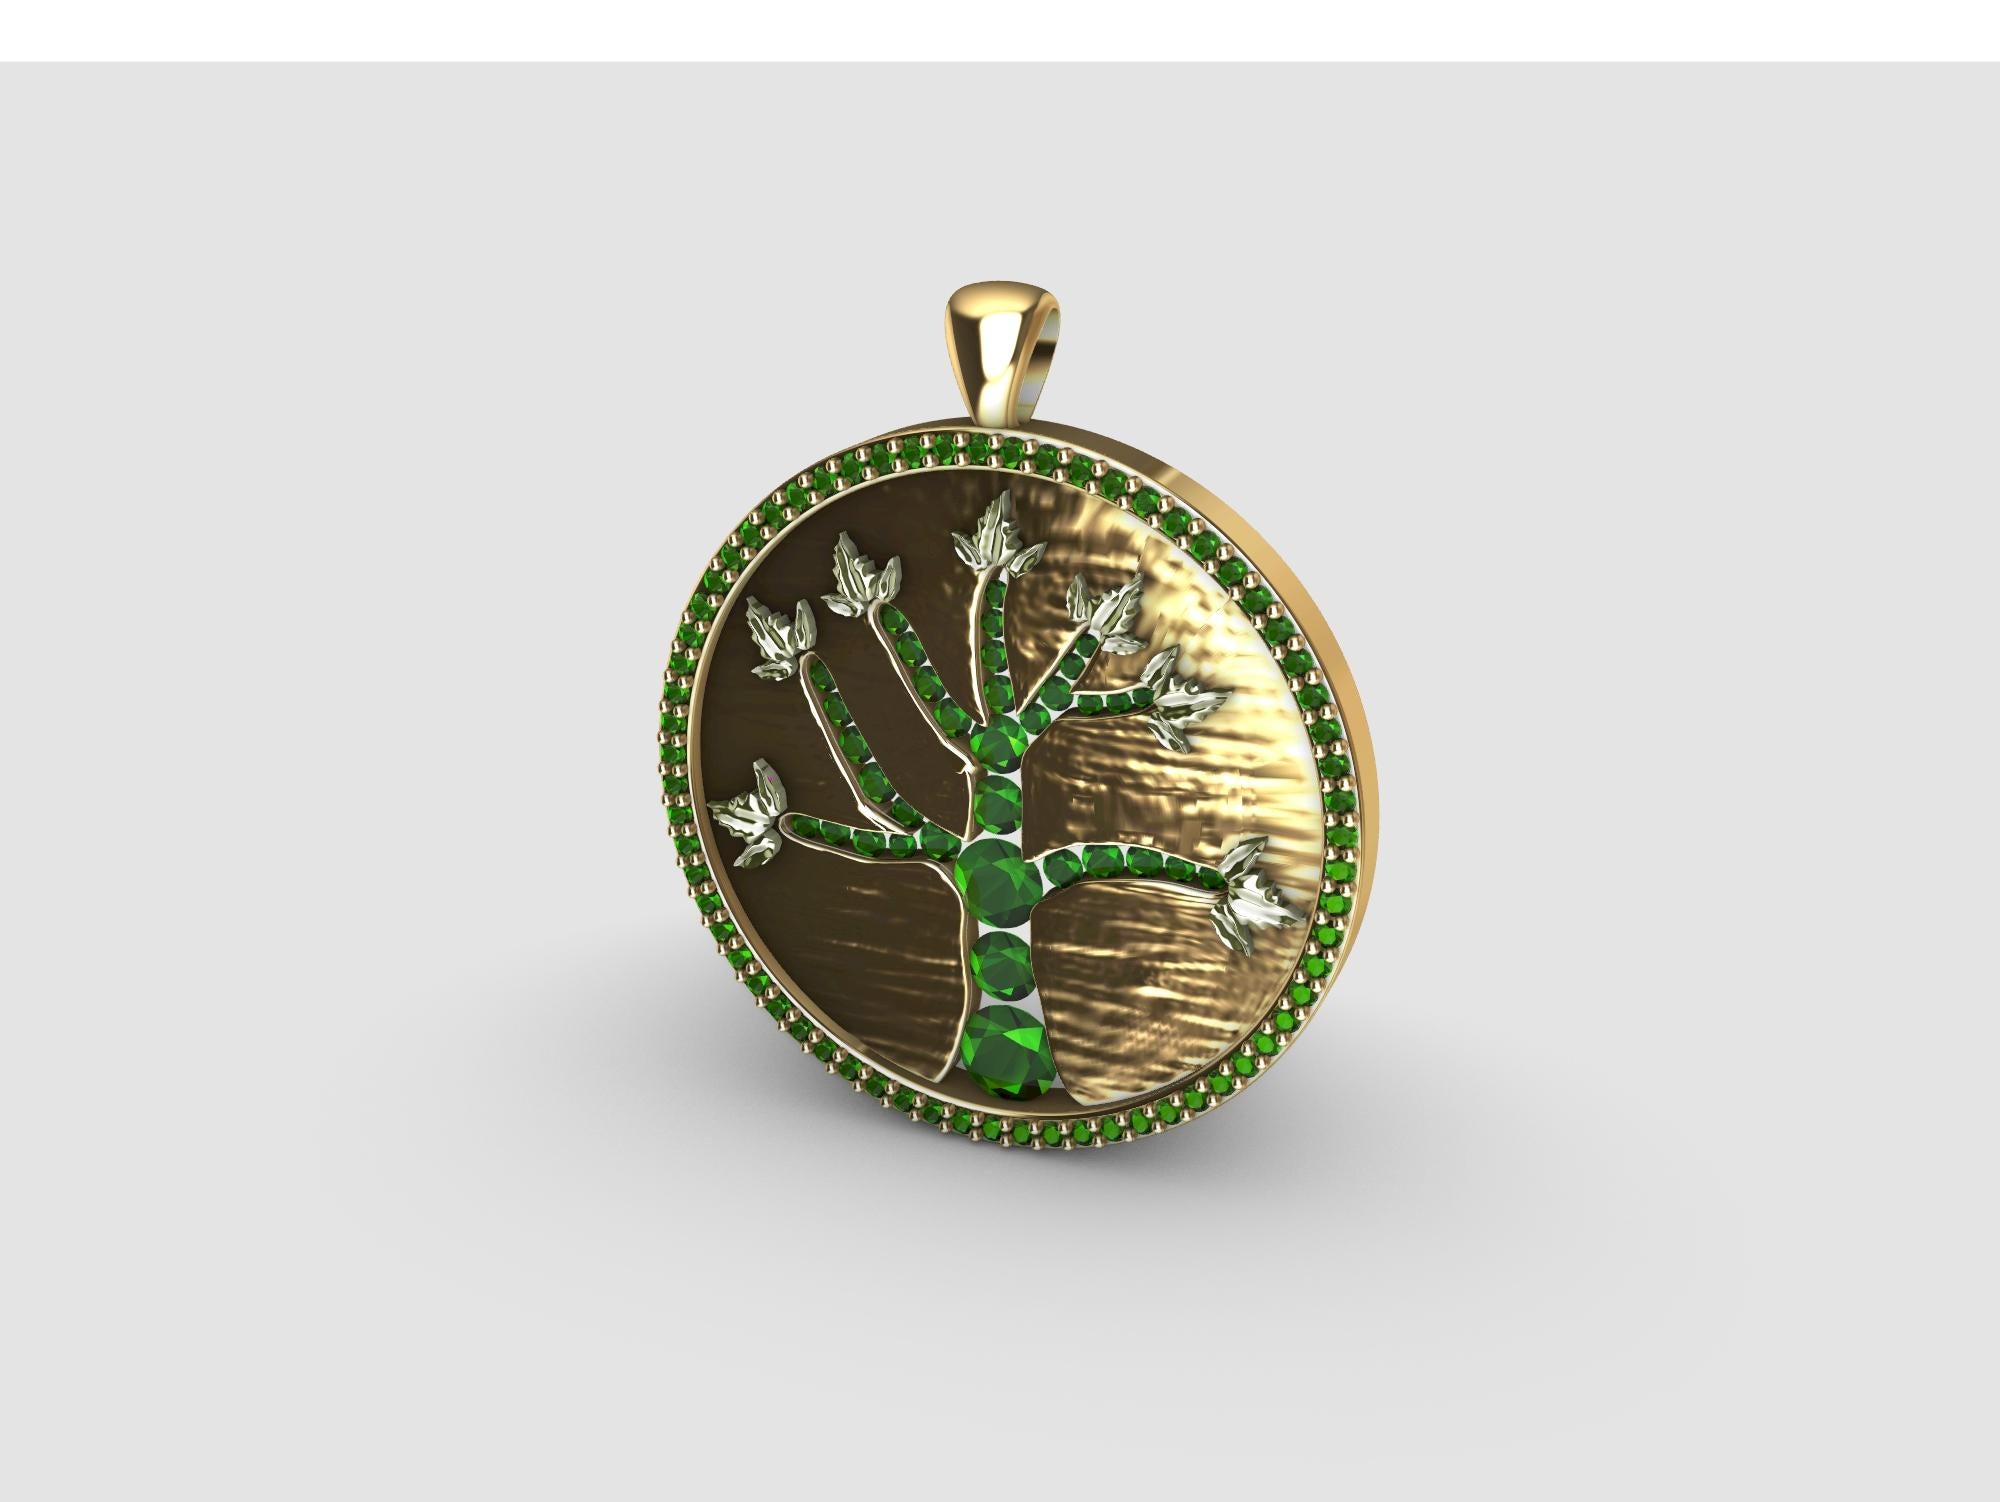 18 Karat Yellow Gold and Emeralds Tree of Life Pendant, Tiffany designer Thomas Kurilla  has Redesigned the Tree of Life with more vigor. To bring more joy into your lfe. Light is Life, why not diamonds for the tree trunk?  Life is precious . We